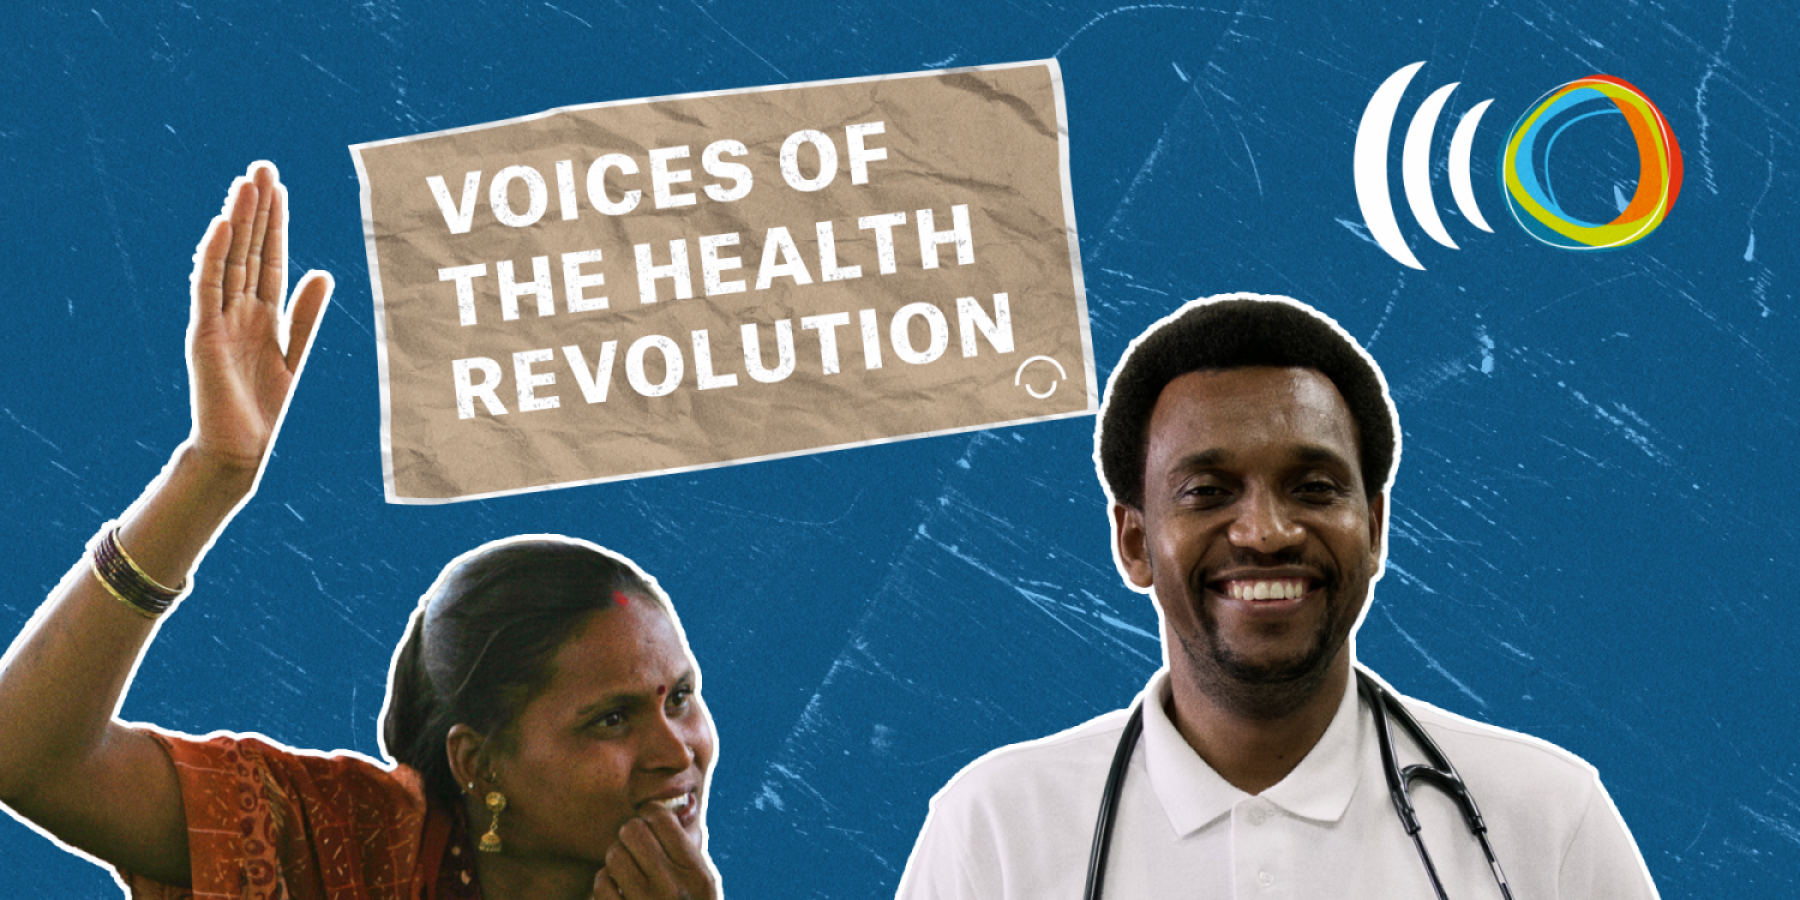 Voices of the Health Revolution